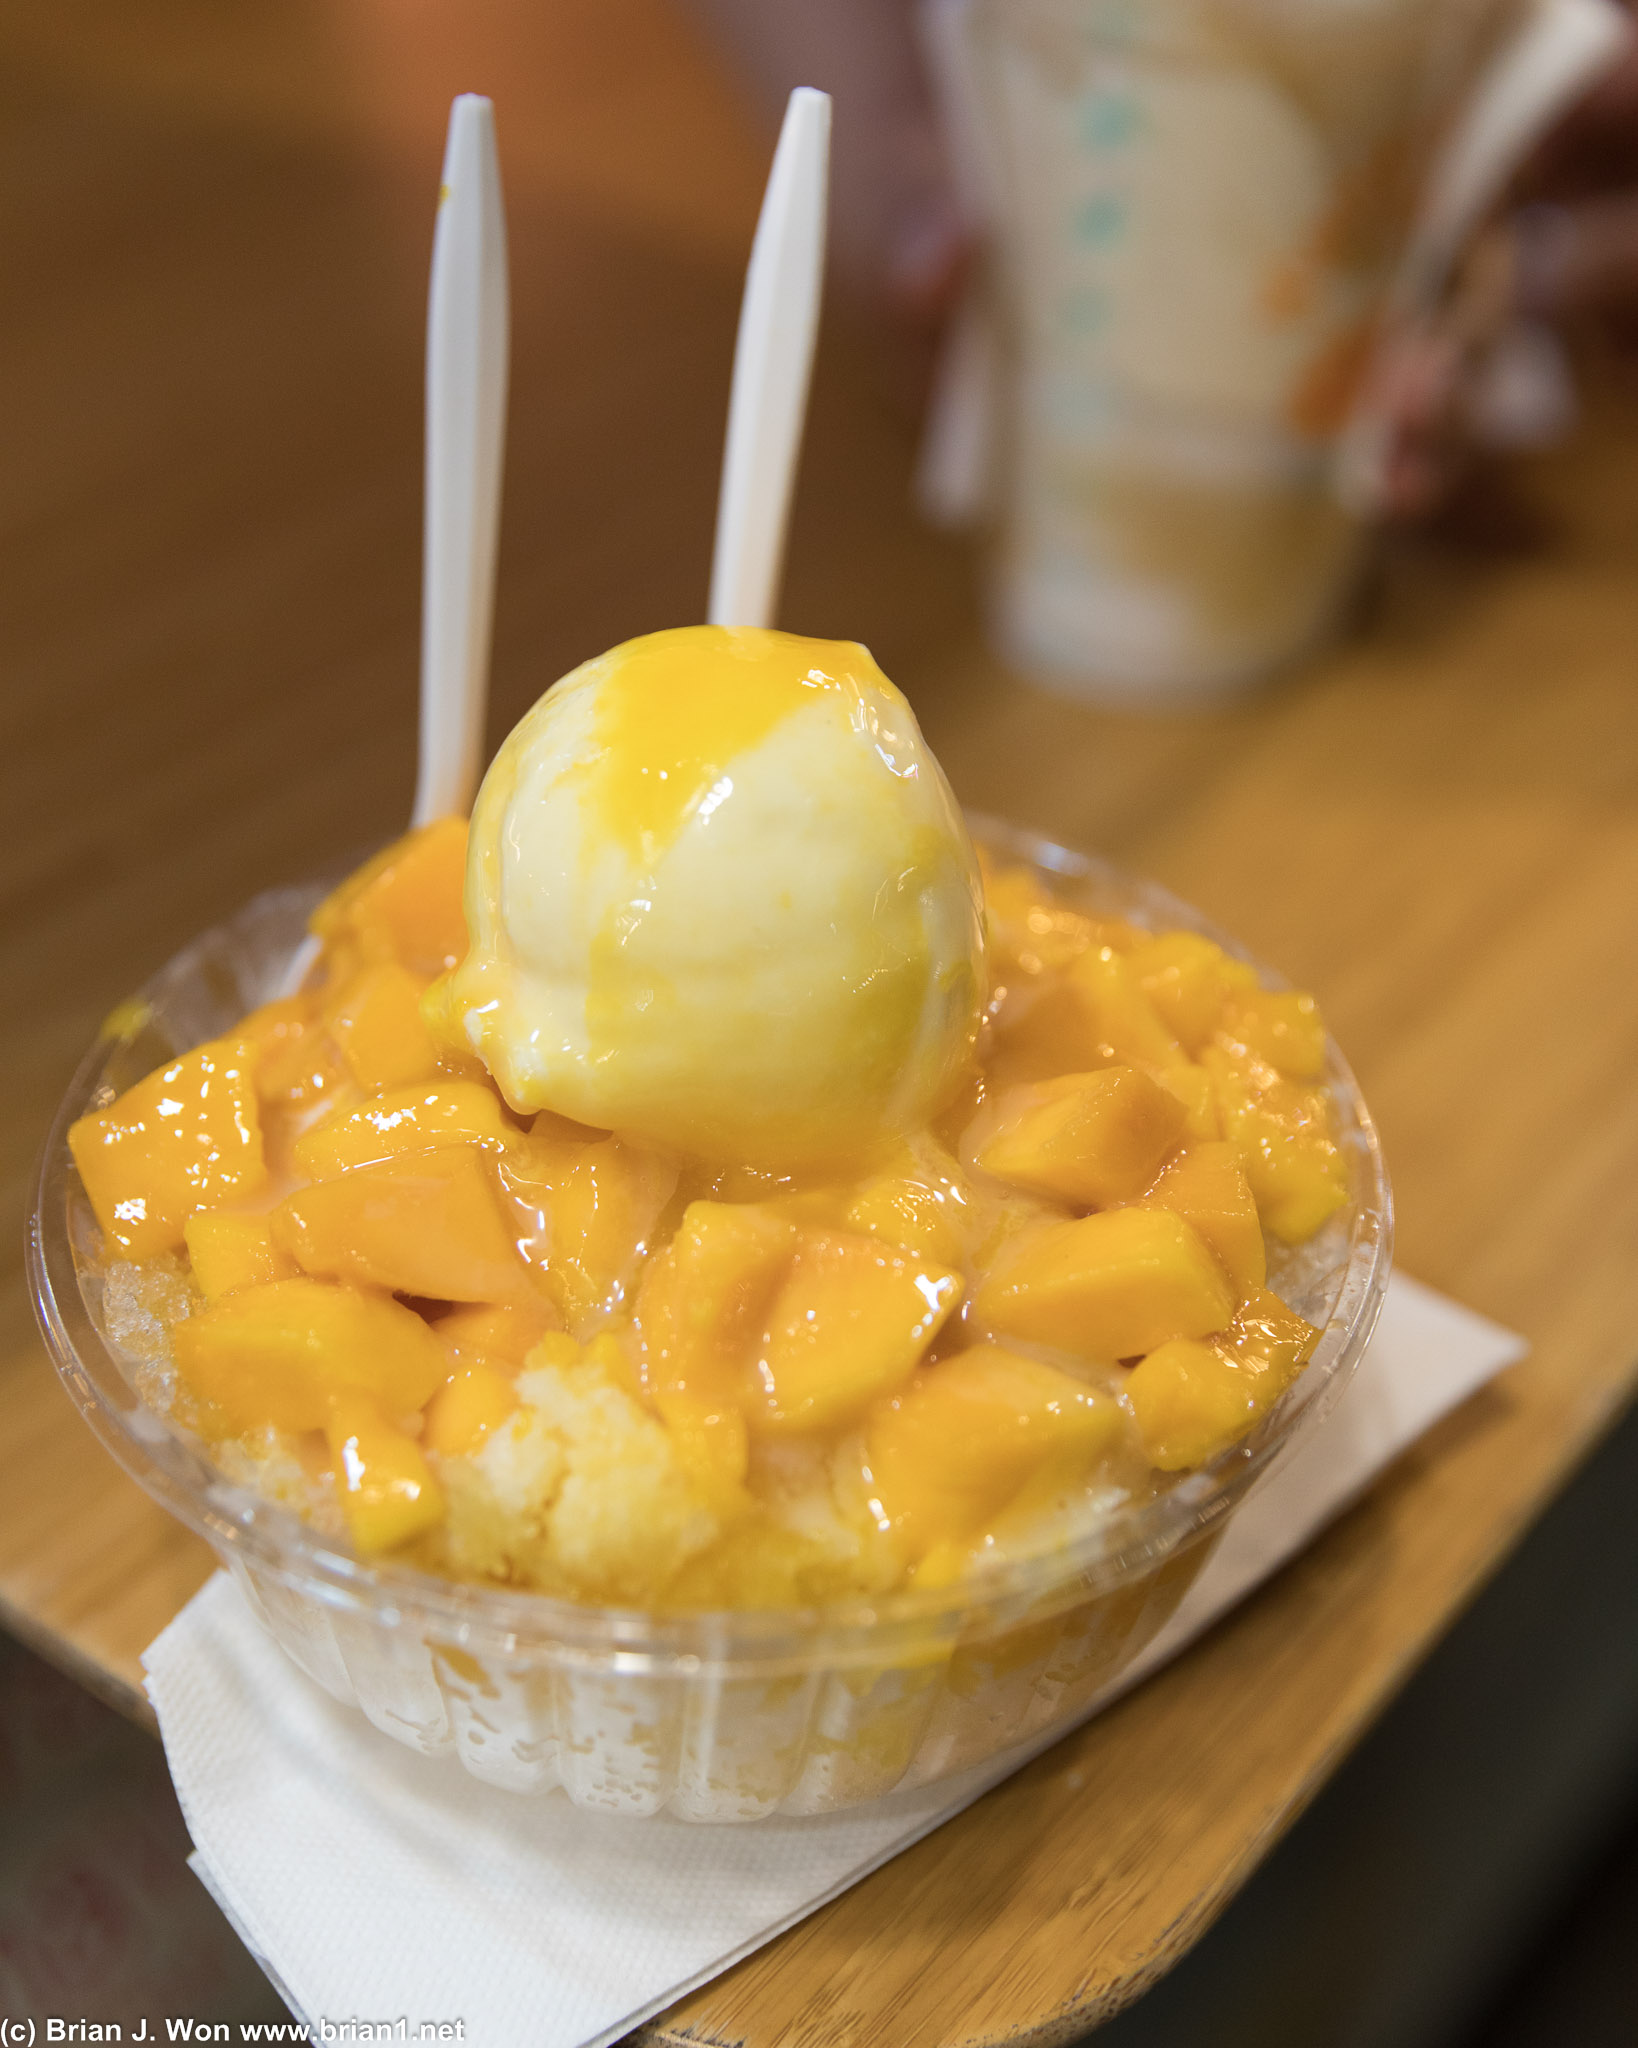 Mango Yummy's mango + ice cream shaved ice. Sized for two. I ate it all anyway. #oink